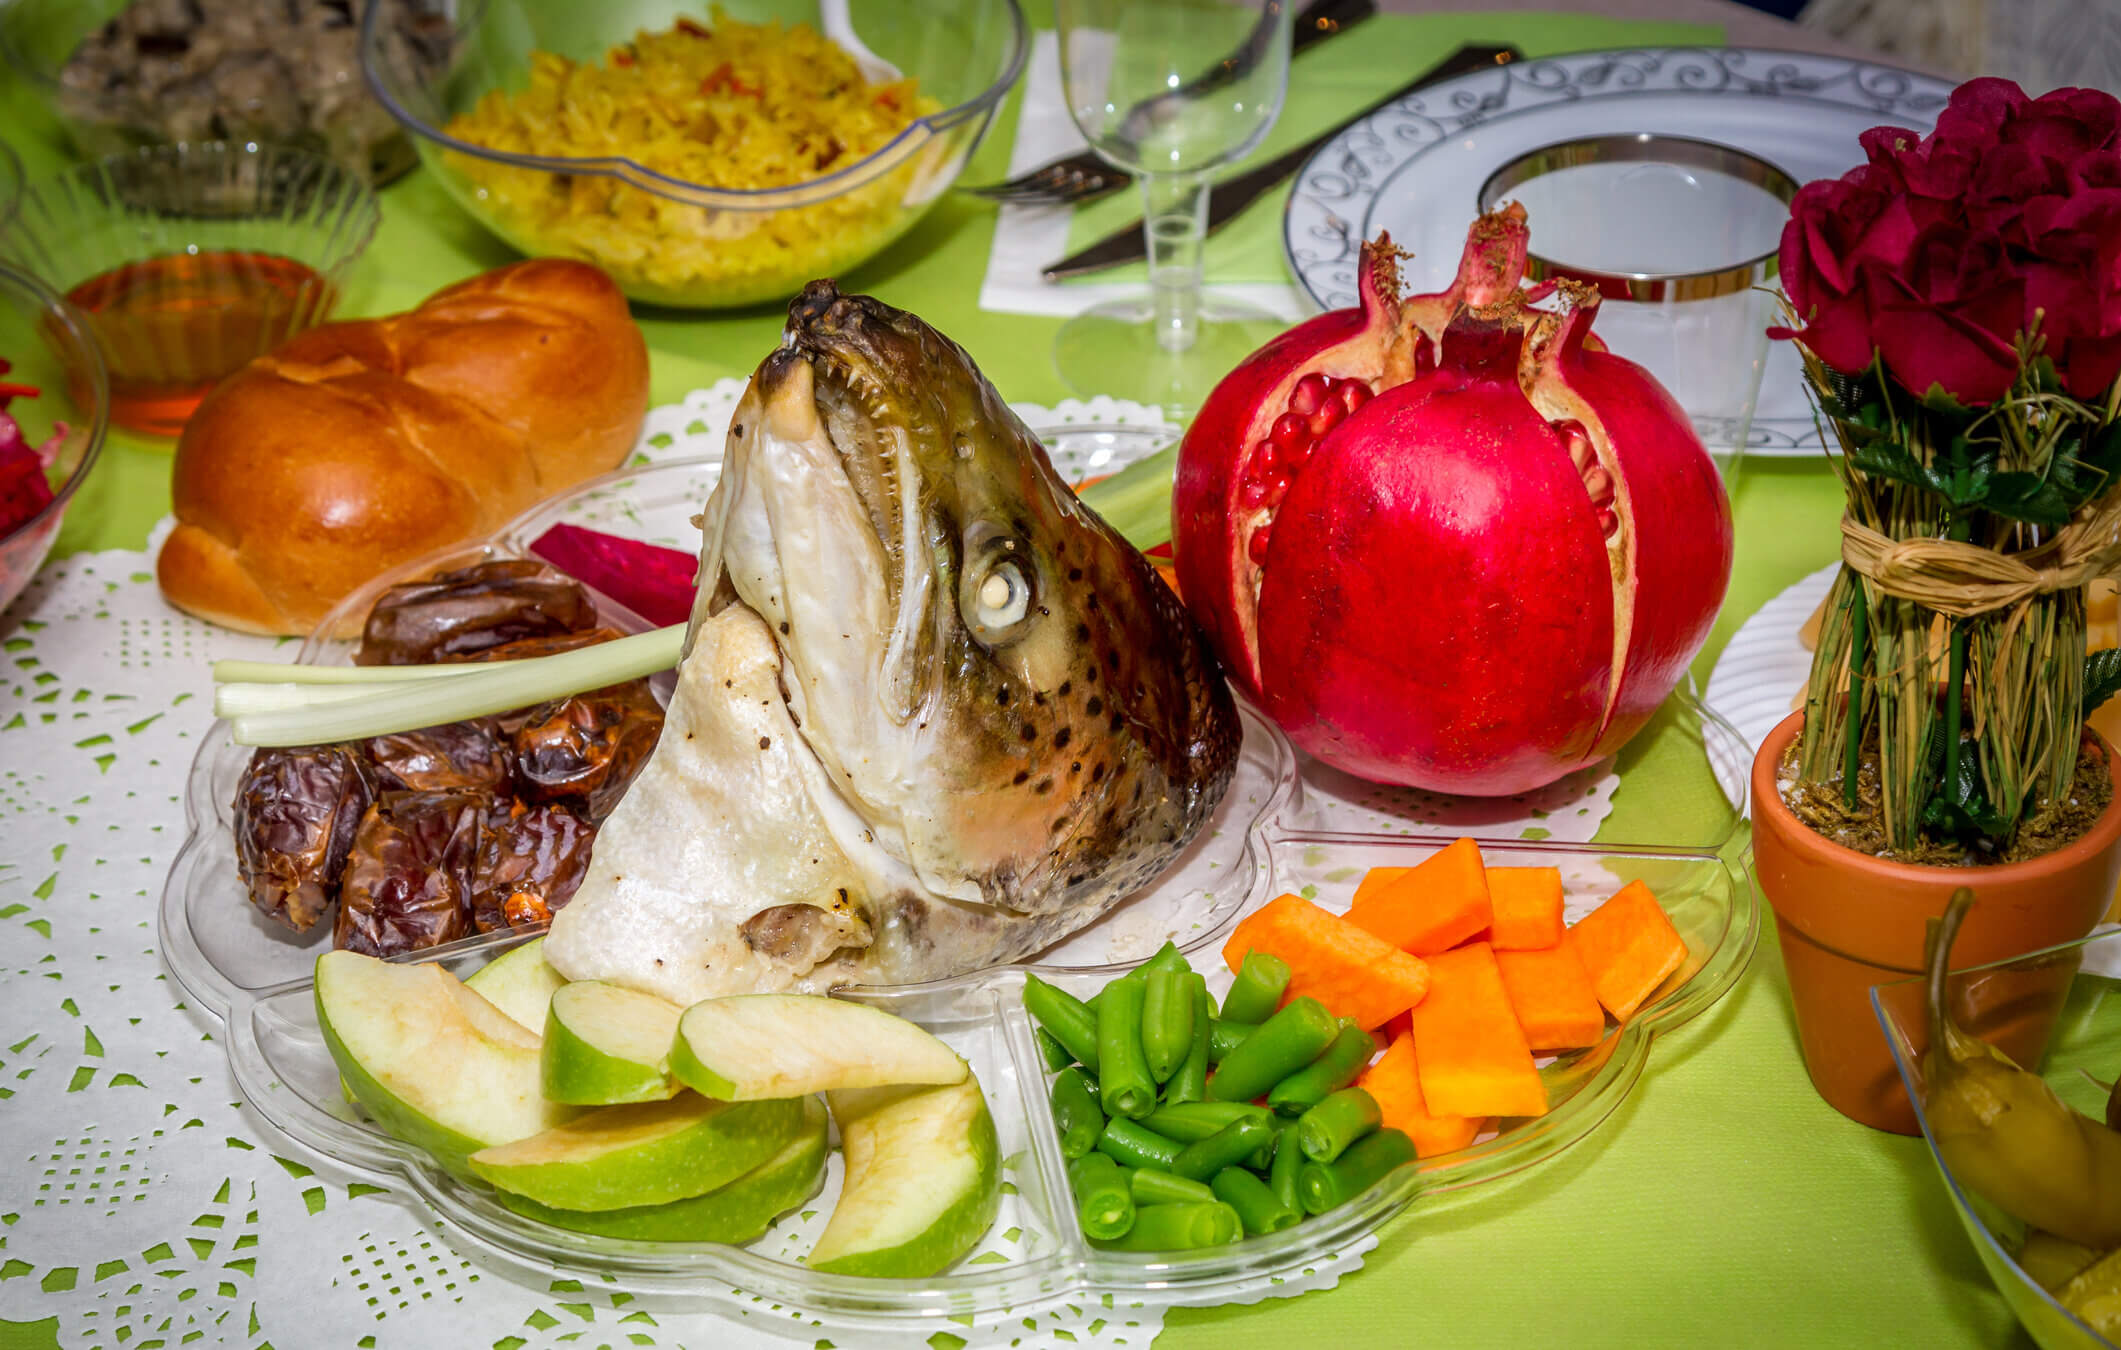 Doesn't the Rosh Hashanah seder look fun, fresh and appetizing? Just ignore the fish head glaring at you from the middle.